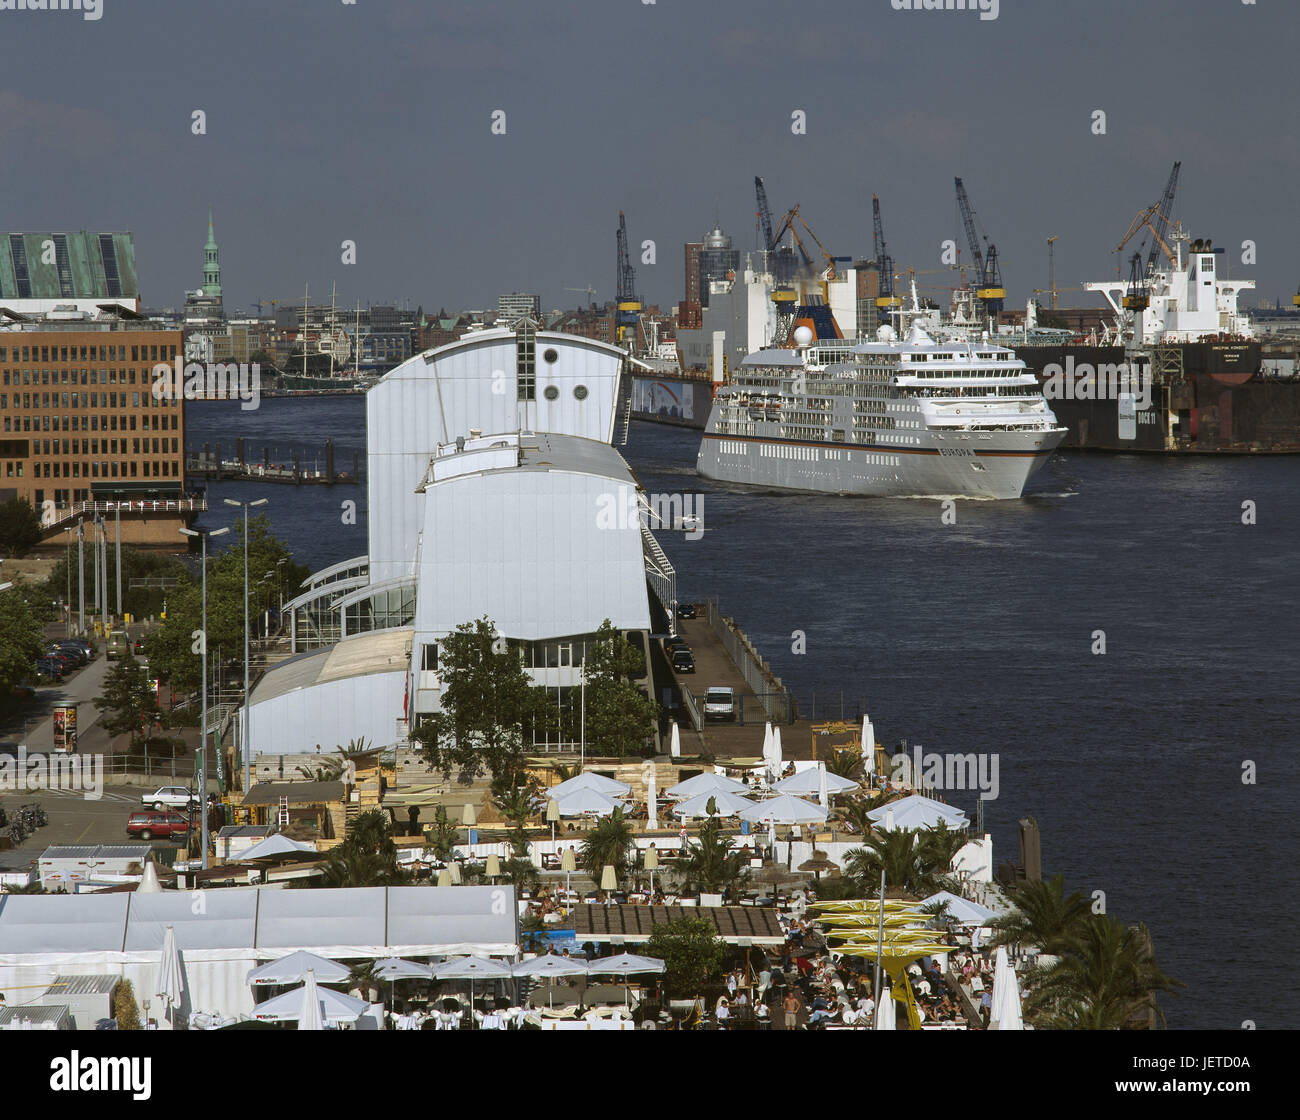 Germany, Hamburg, the Elbe, ship, MS Europe, Beach club, dock, formerly Fähr and cruise terminal, North Germany, city, Hanseatic town, port, town, cranes, river, channel, riverside, leisure time, clubs, bars, van-der-Smissen-Straße, gastronomy, passenger liner, cruise ship, experience gastronomy, 'beach bars', beach feeling, Edgar angel's hard quay, holiday tuning, person, town view, summer, Stock Photo